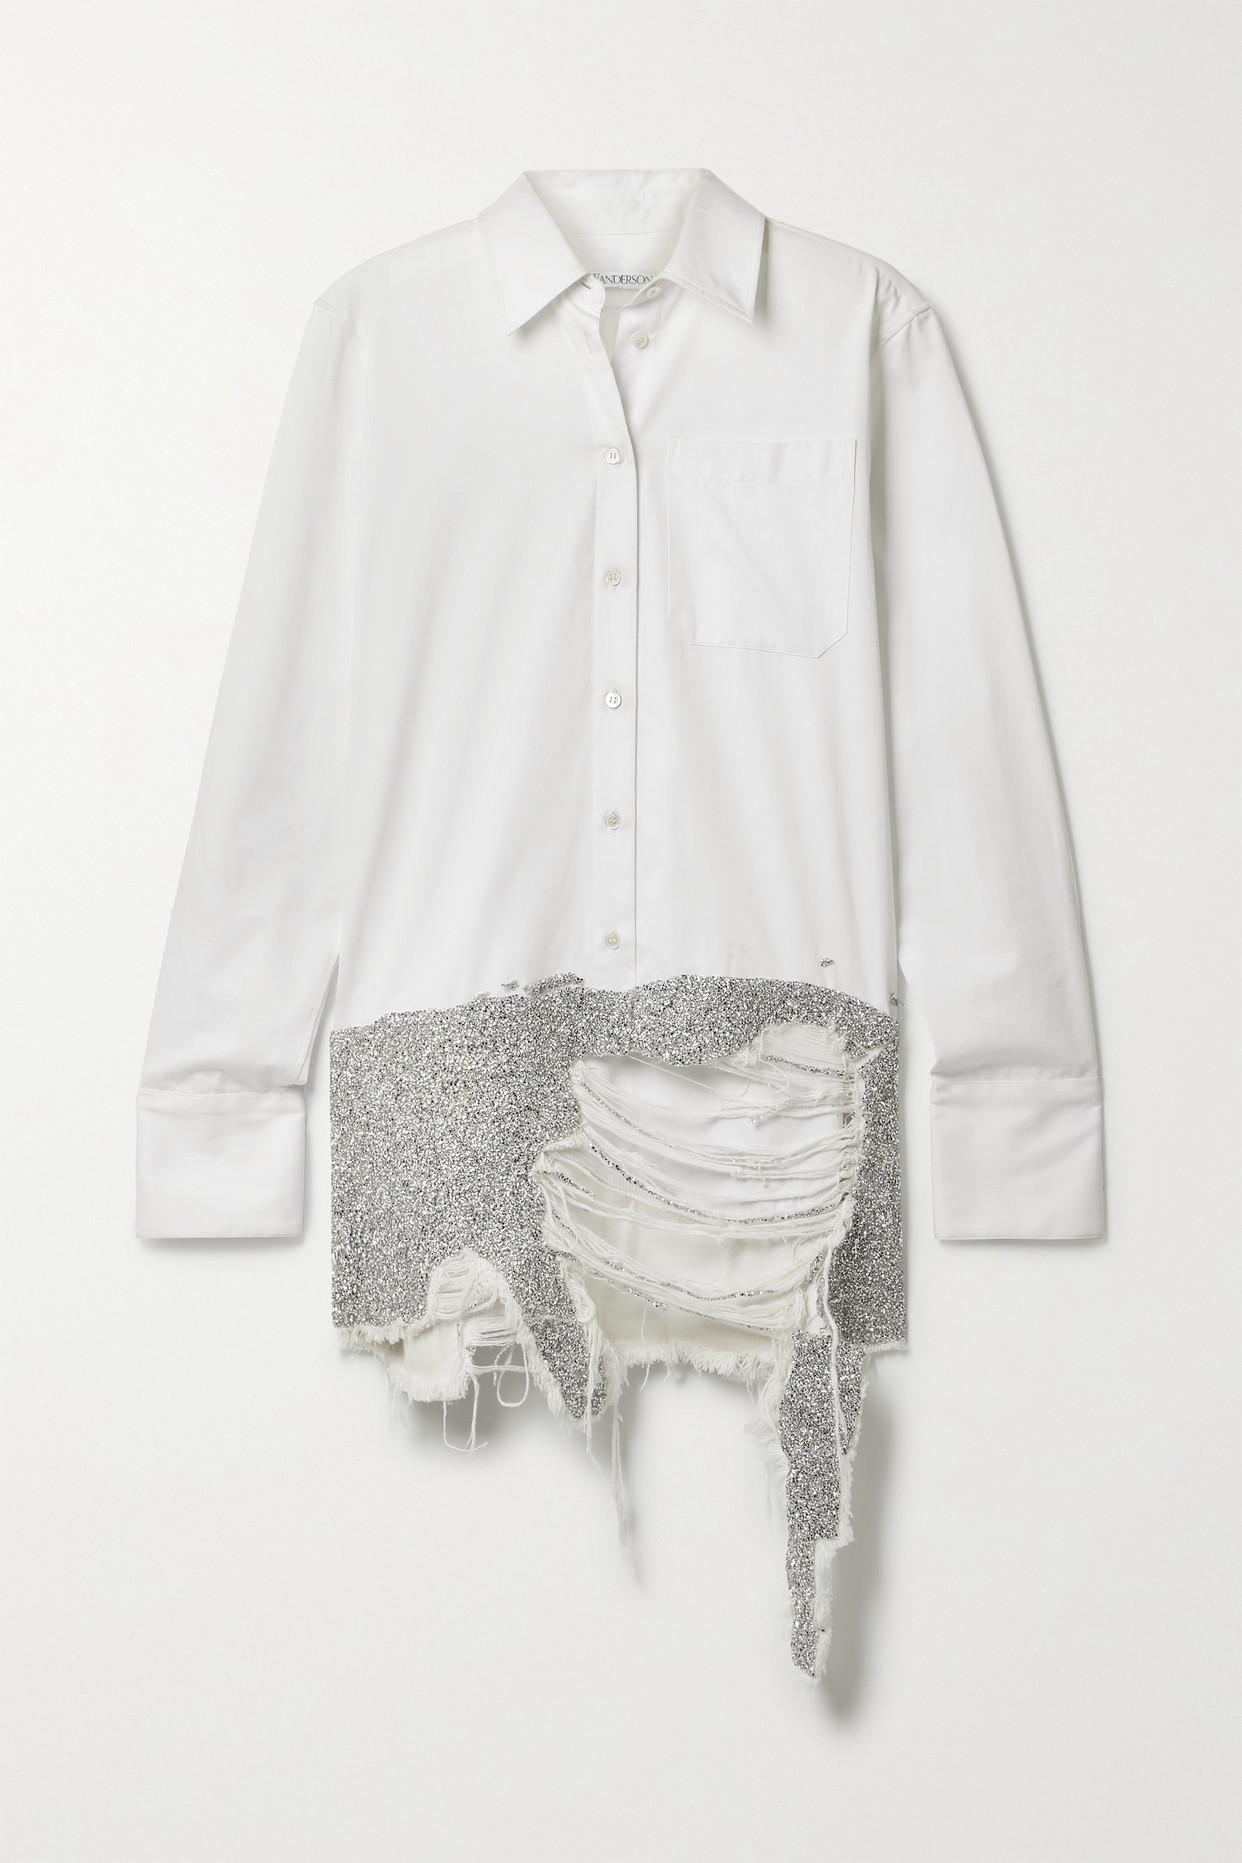 JW Anderson Oversized Crystal-embellished Distressed Cotton-twill